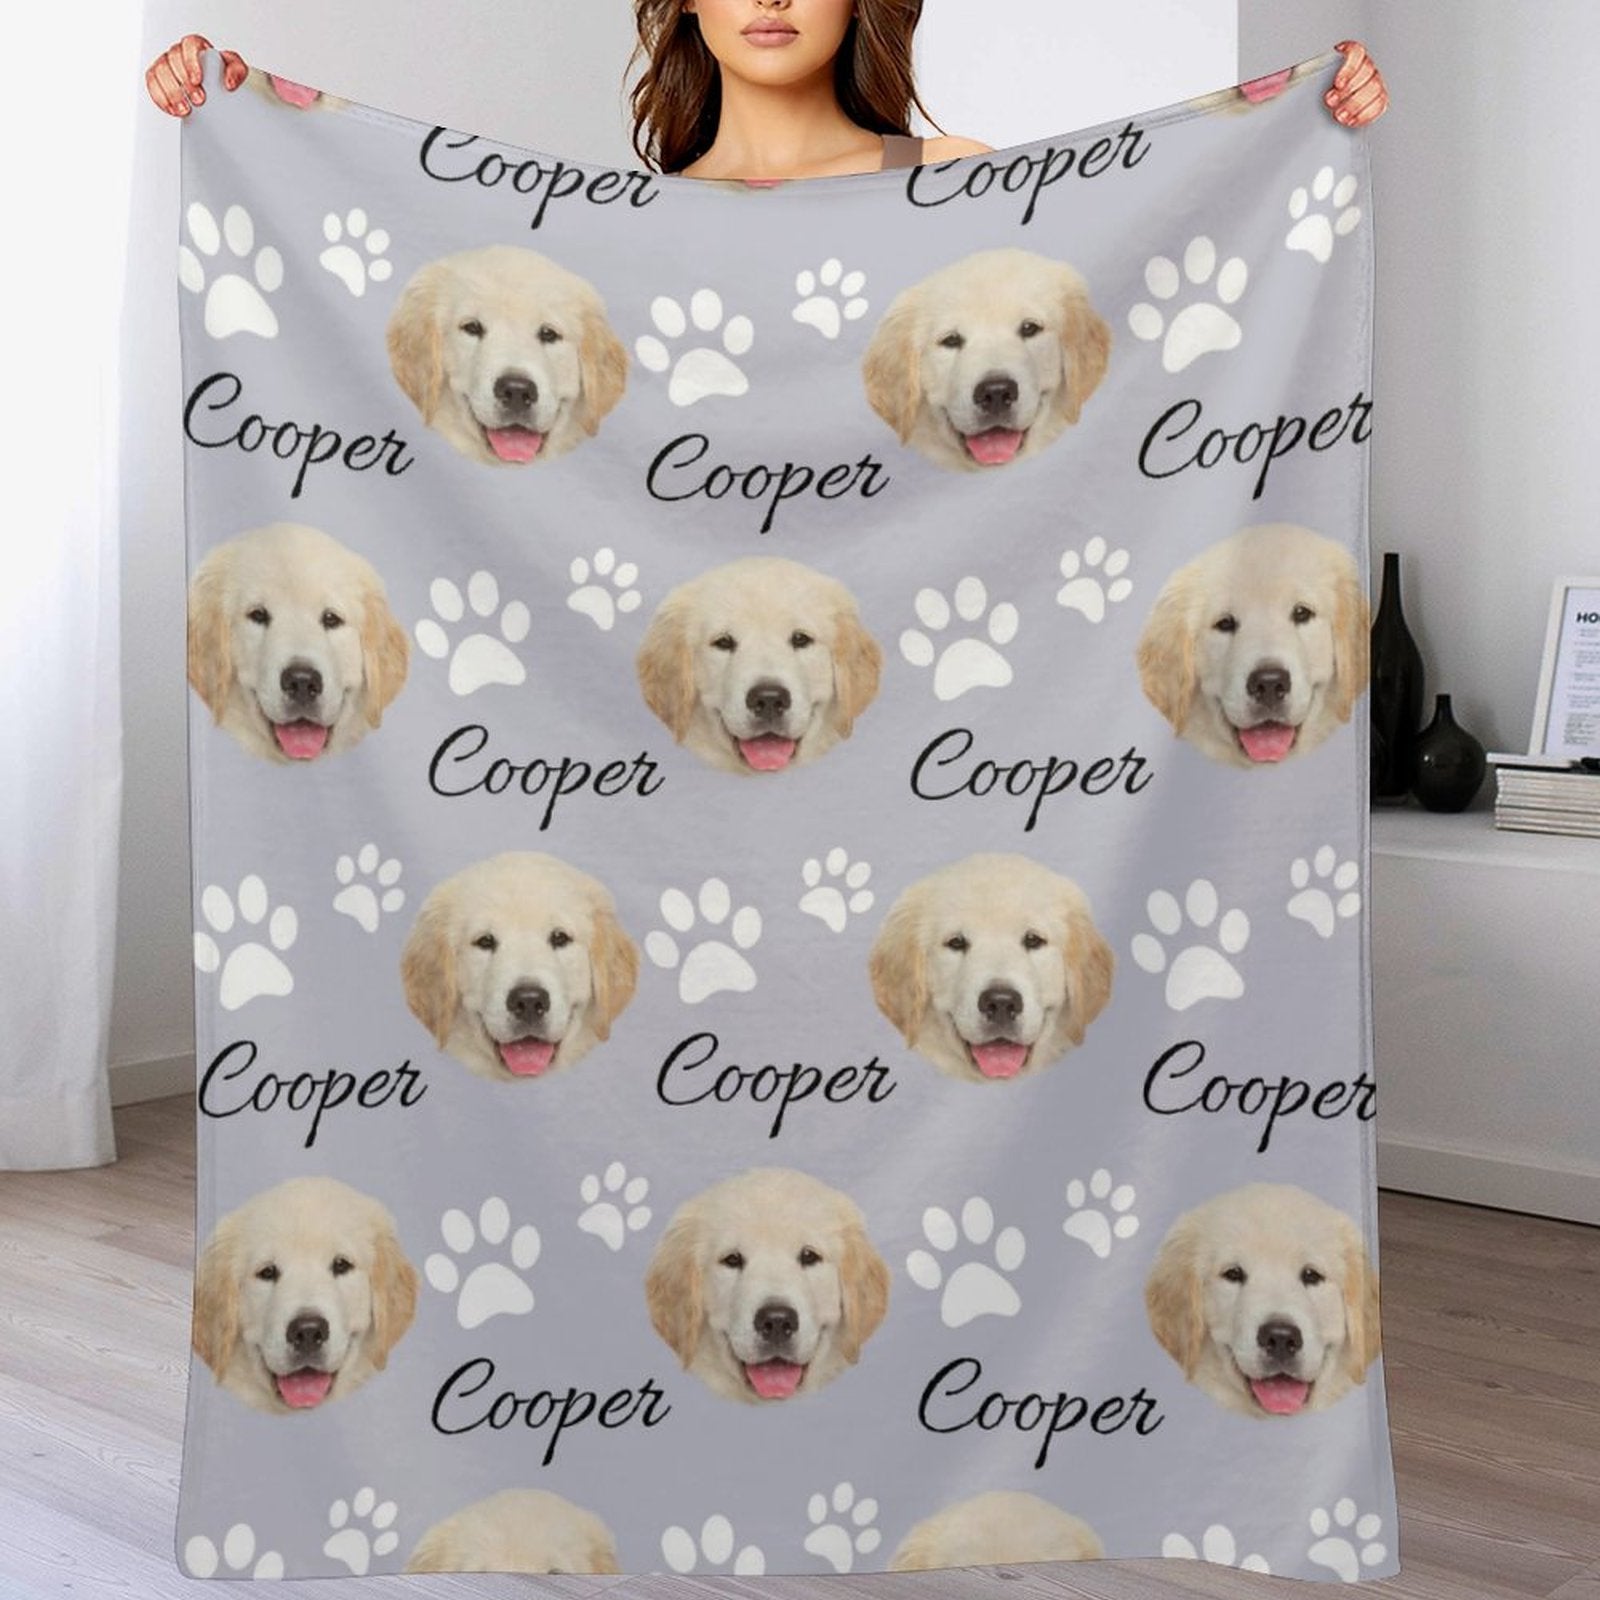 Custom Pet Blanket From Your Pet Photo, Name Custom Dog Blanket, Personalized Dog Blankets,Pet Photo Blanket Dog Gifts - colorfulcustom